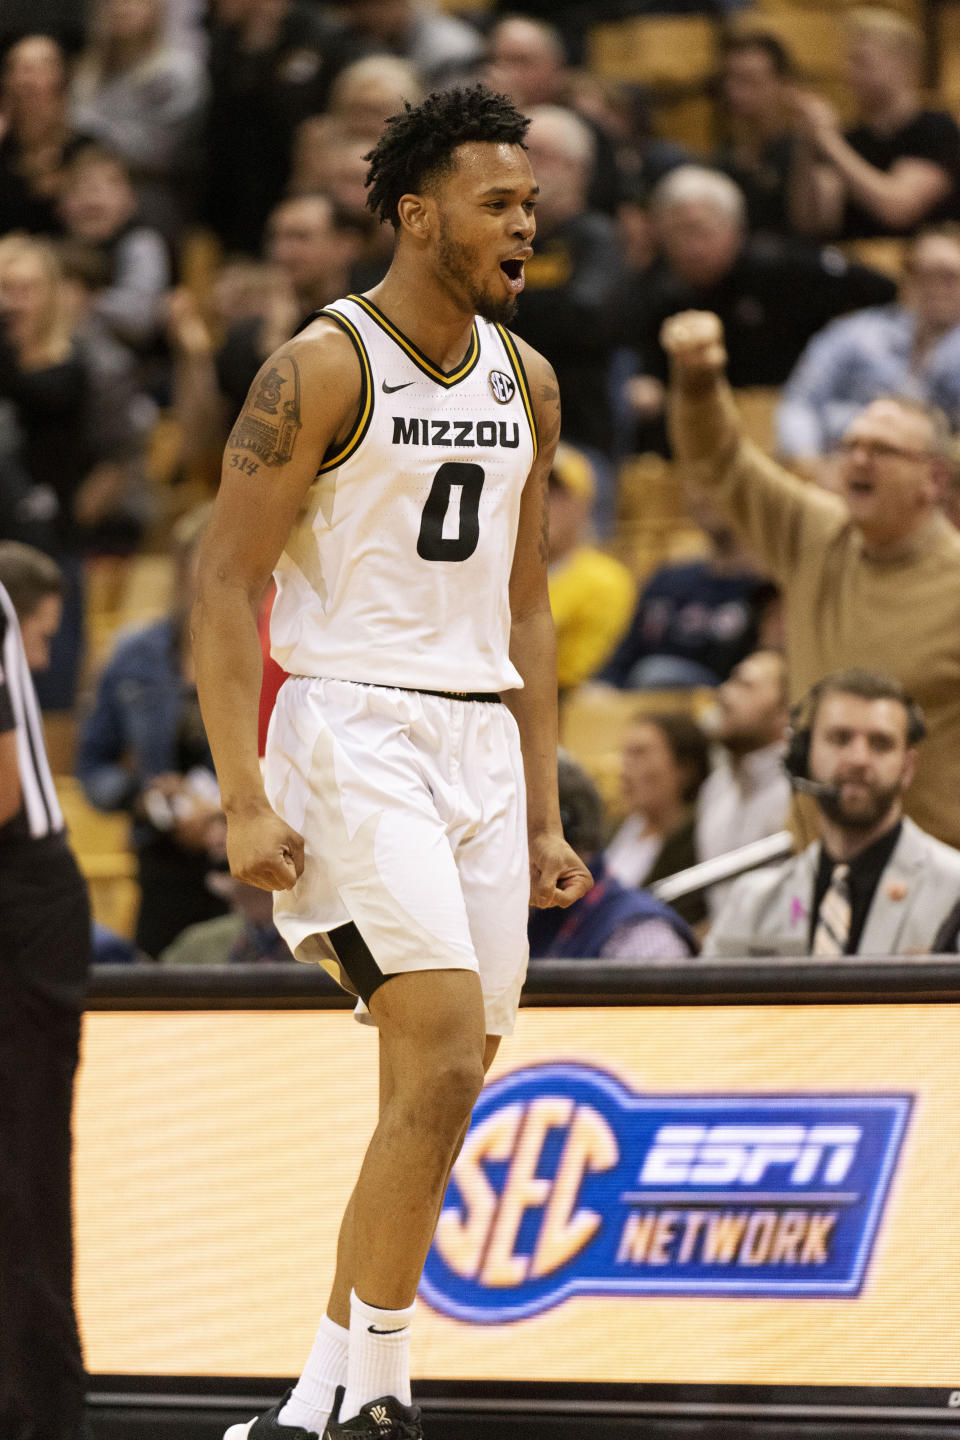 Missouri's Torrence Watson celebrates before a timeout during the second half of an NCAA college basketball game against Mississippi Tuesday, Feb. 18, 2020, in Columbia, Mo. Missouri won 71-68.(AP Photo/L.G. Patterson)